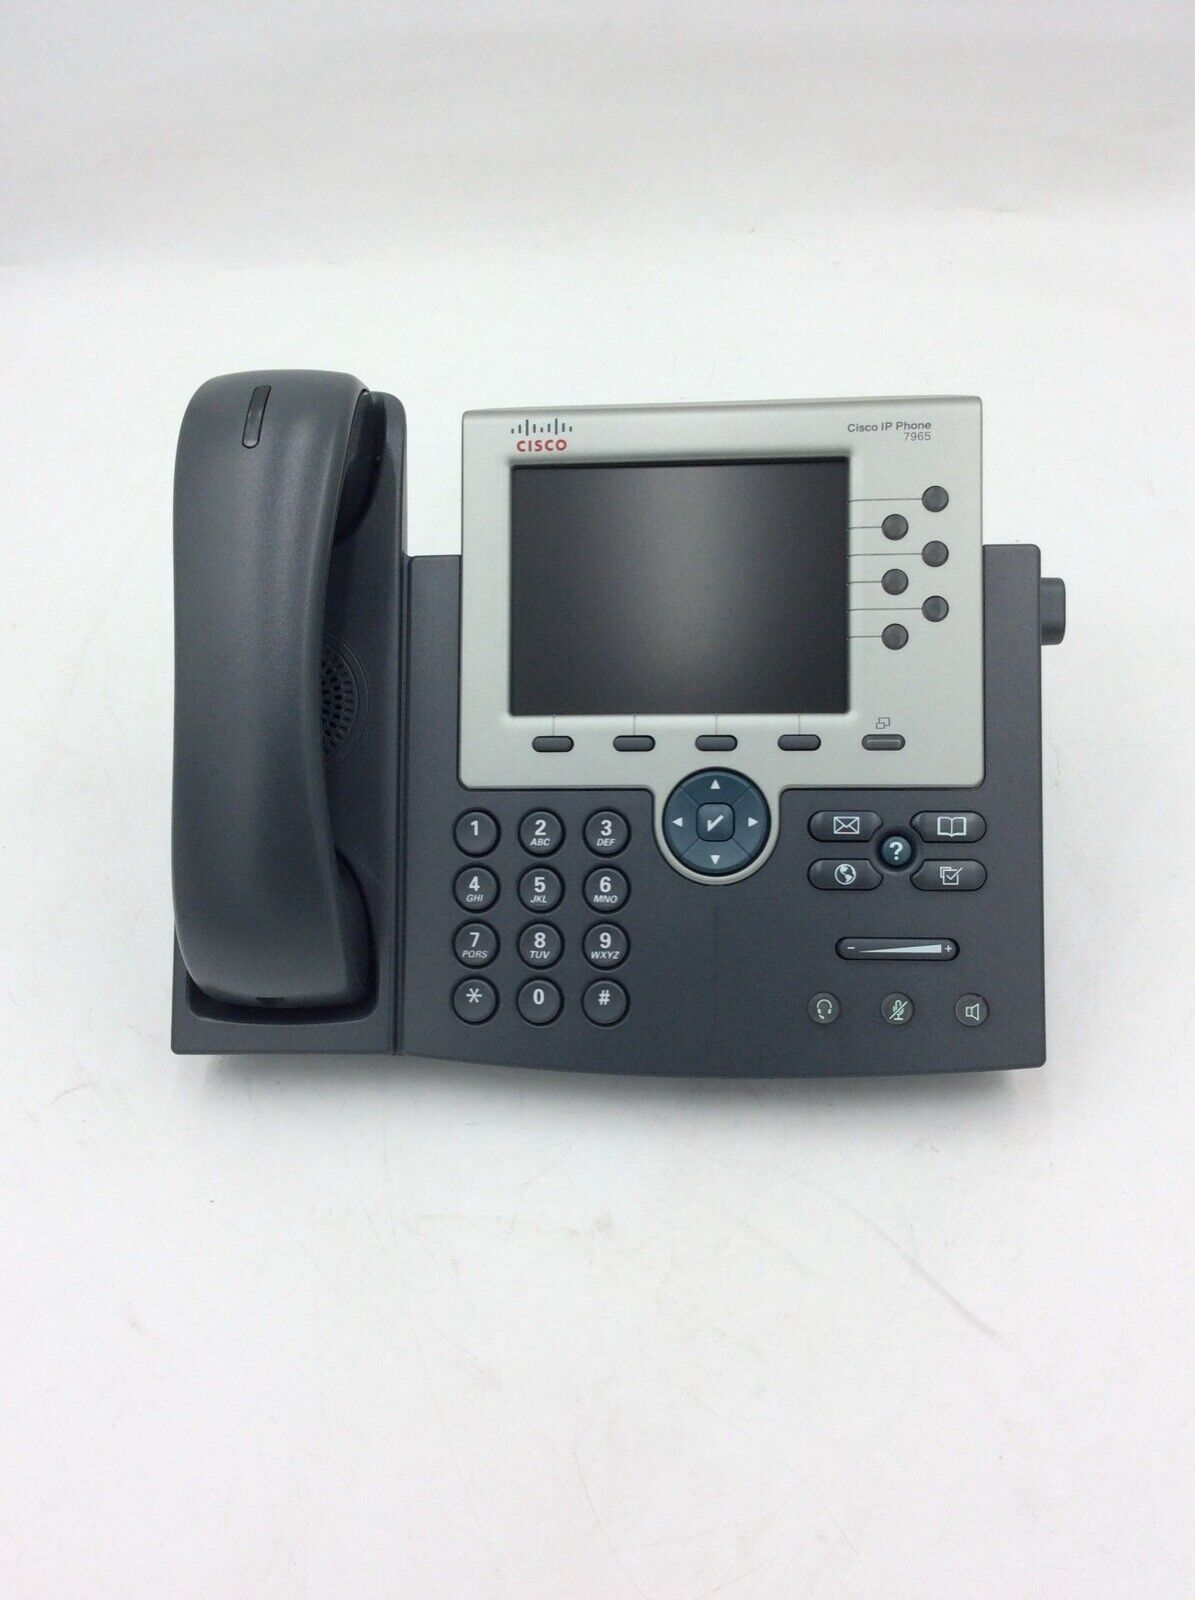 Cisco 7900 CP-7911G Unified IP Telephone PoE Business Office Phone Excelent Cond